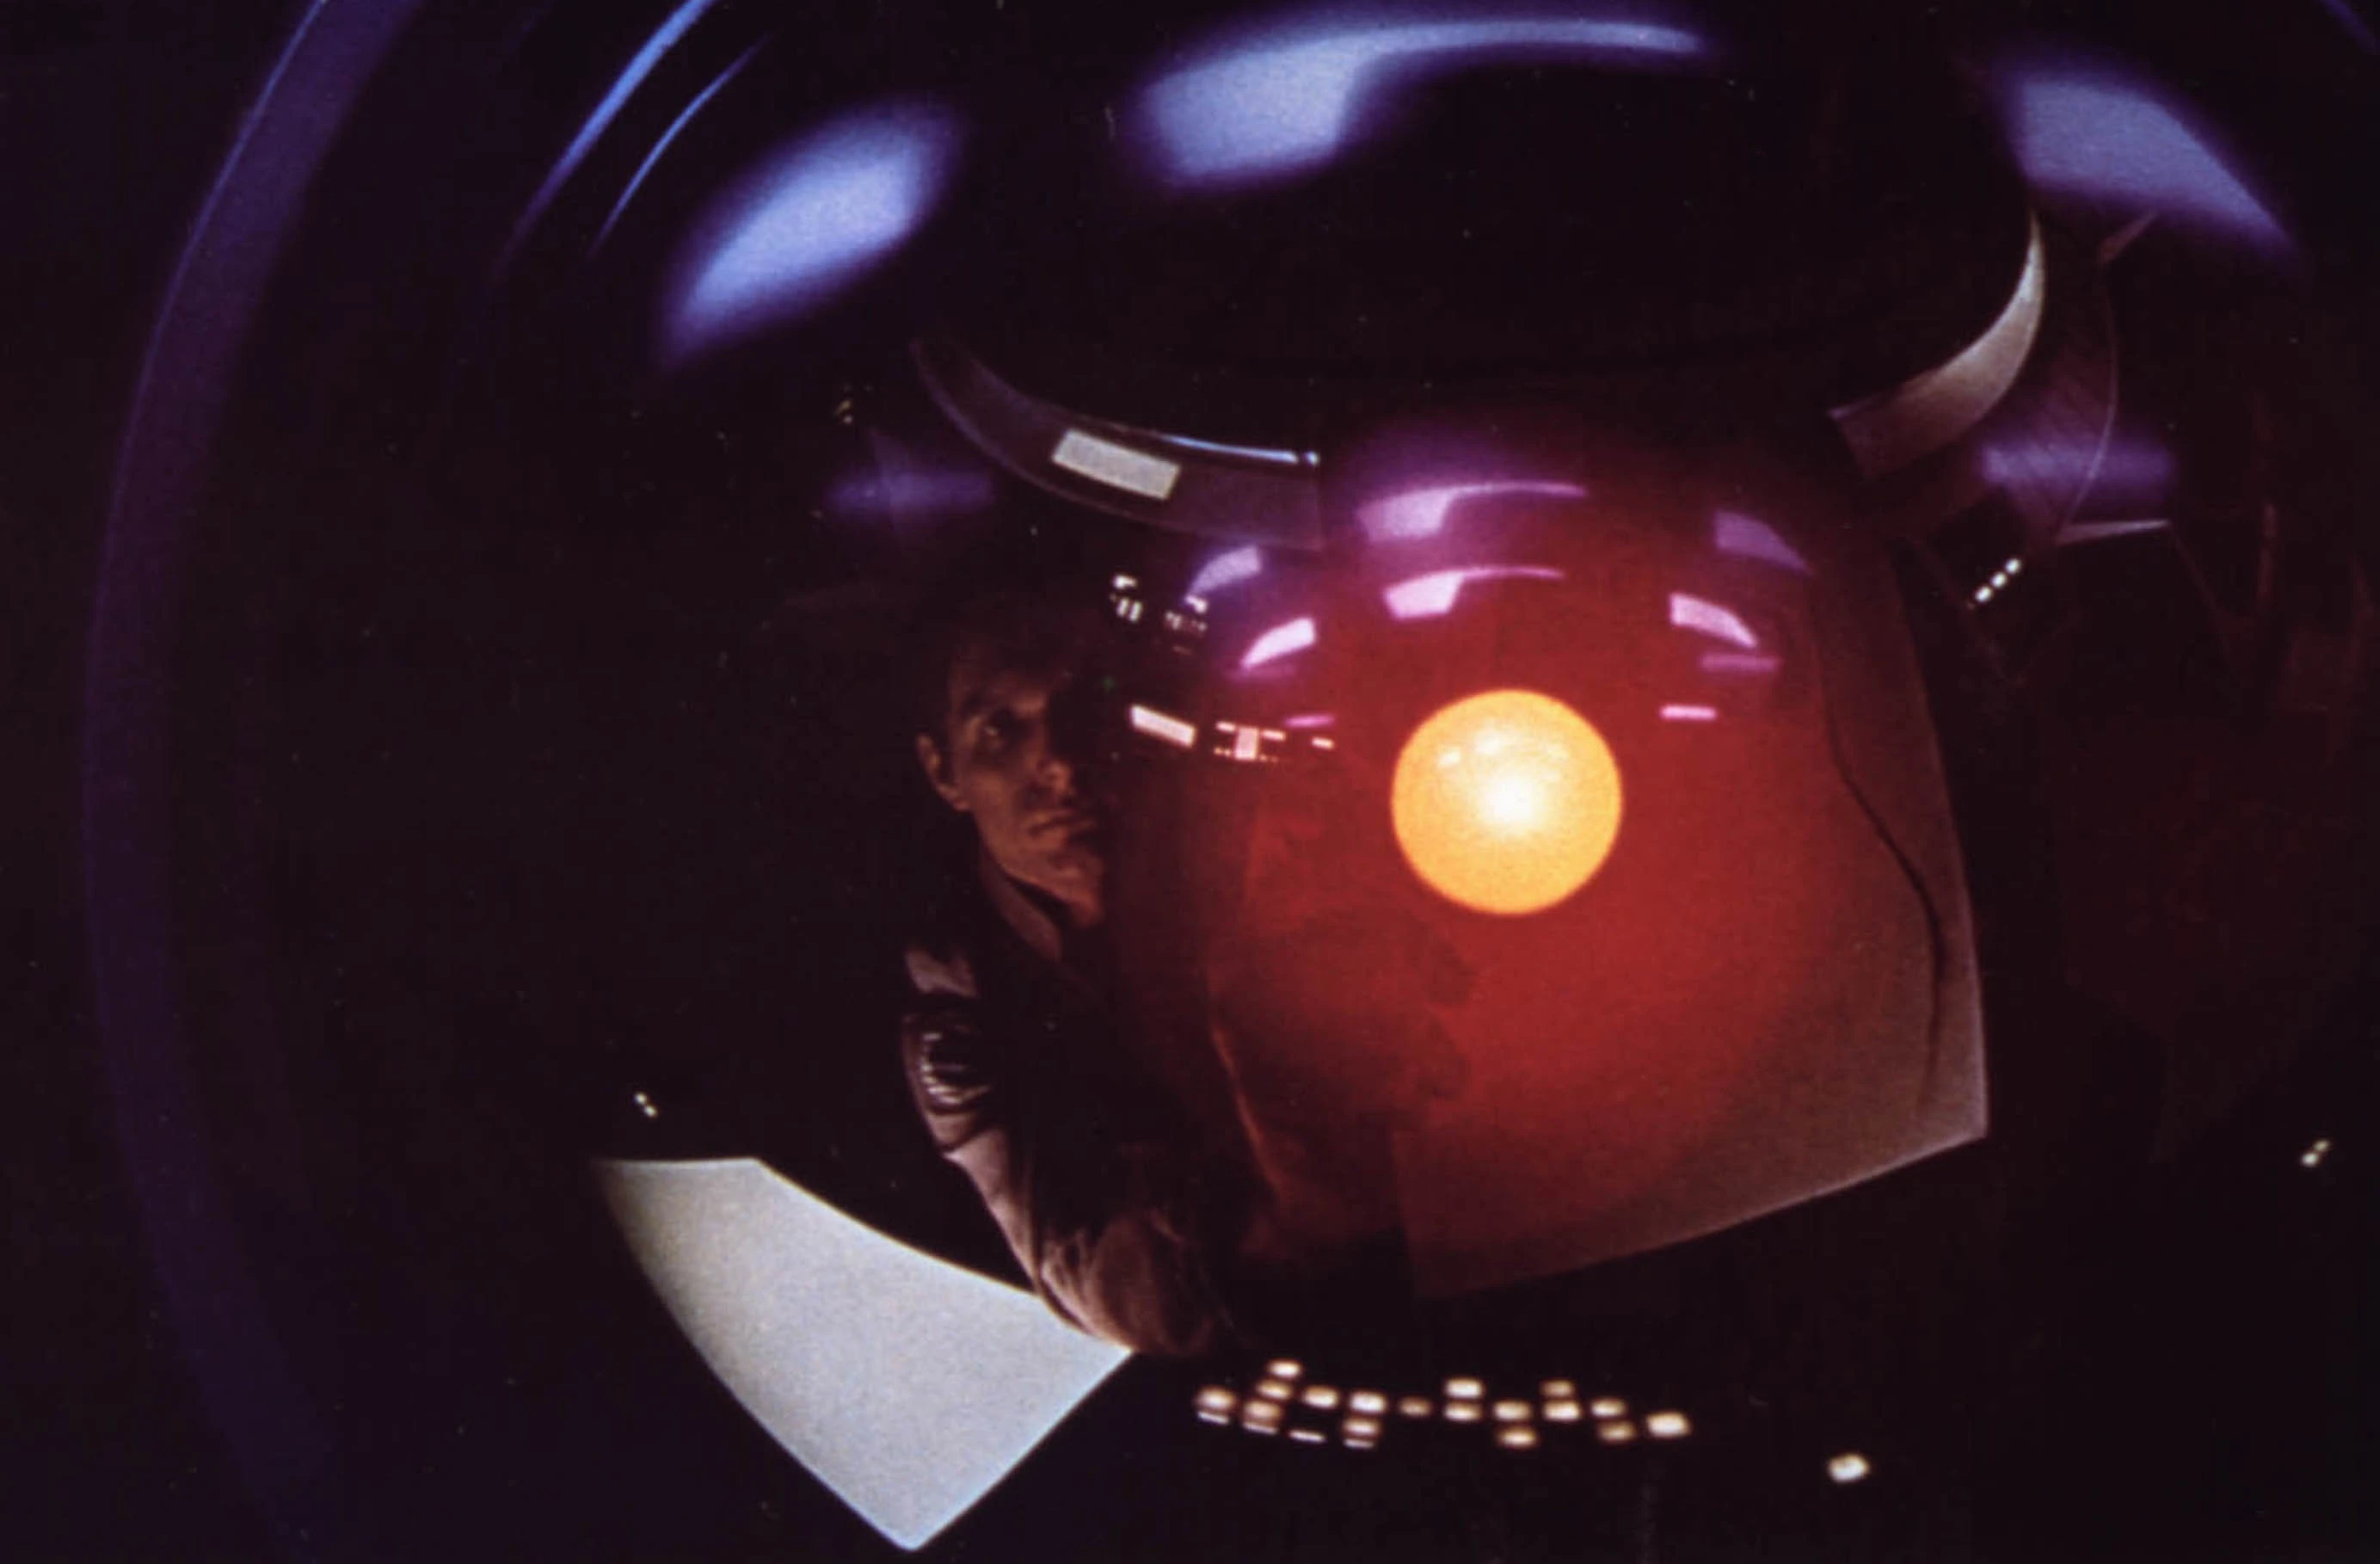 Camera eye of HAL from 2001 A Space Odyssey